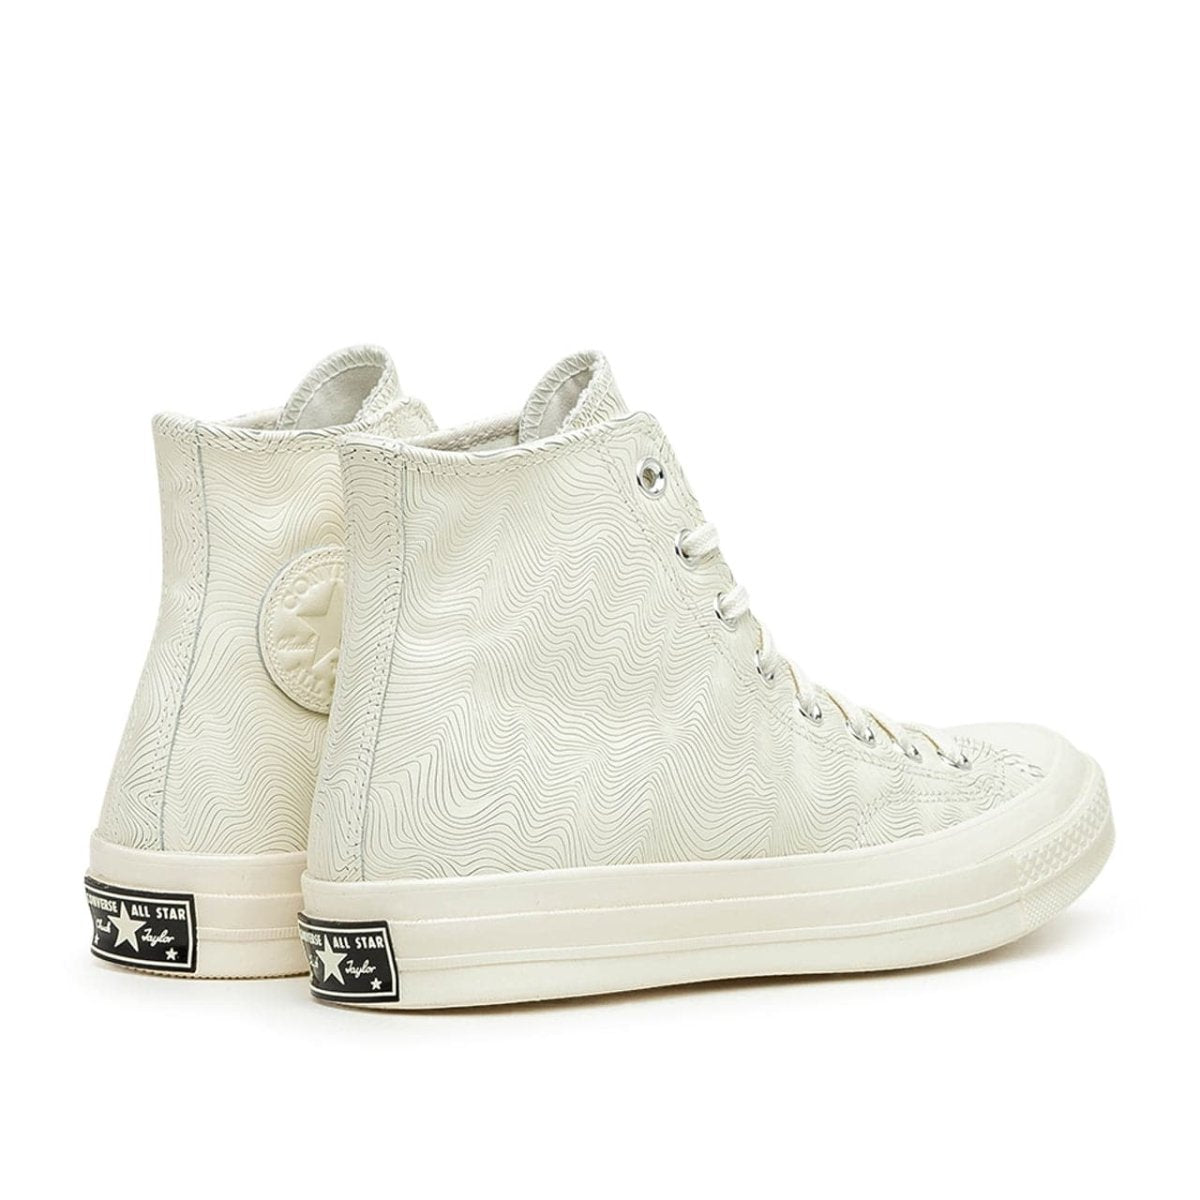 Converse Color Leather Chuck 70 (Weiß)  - Allike Store